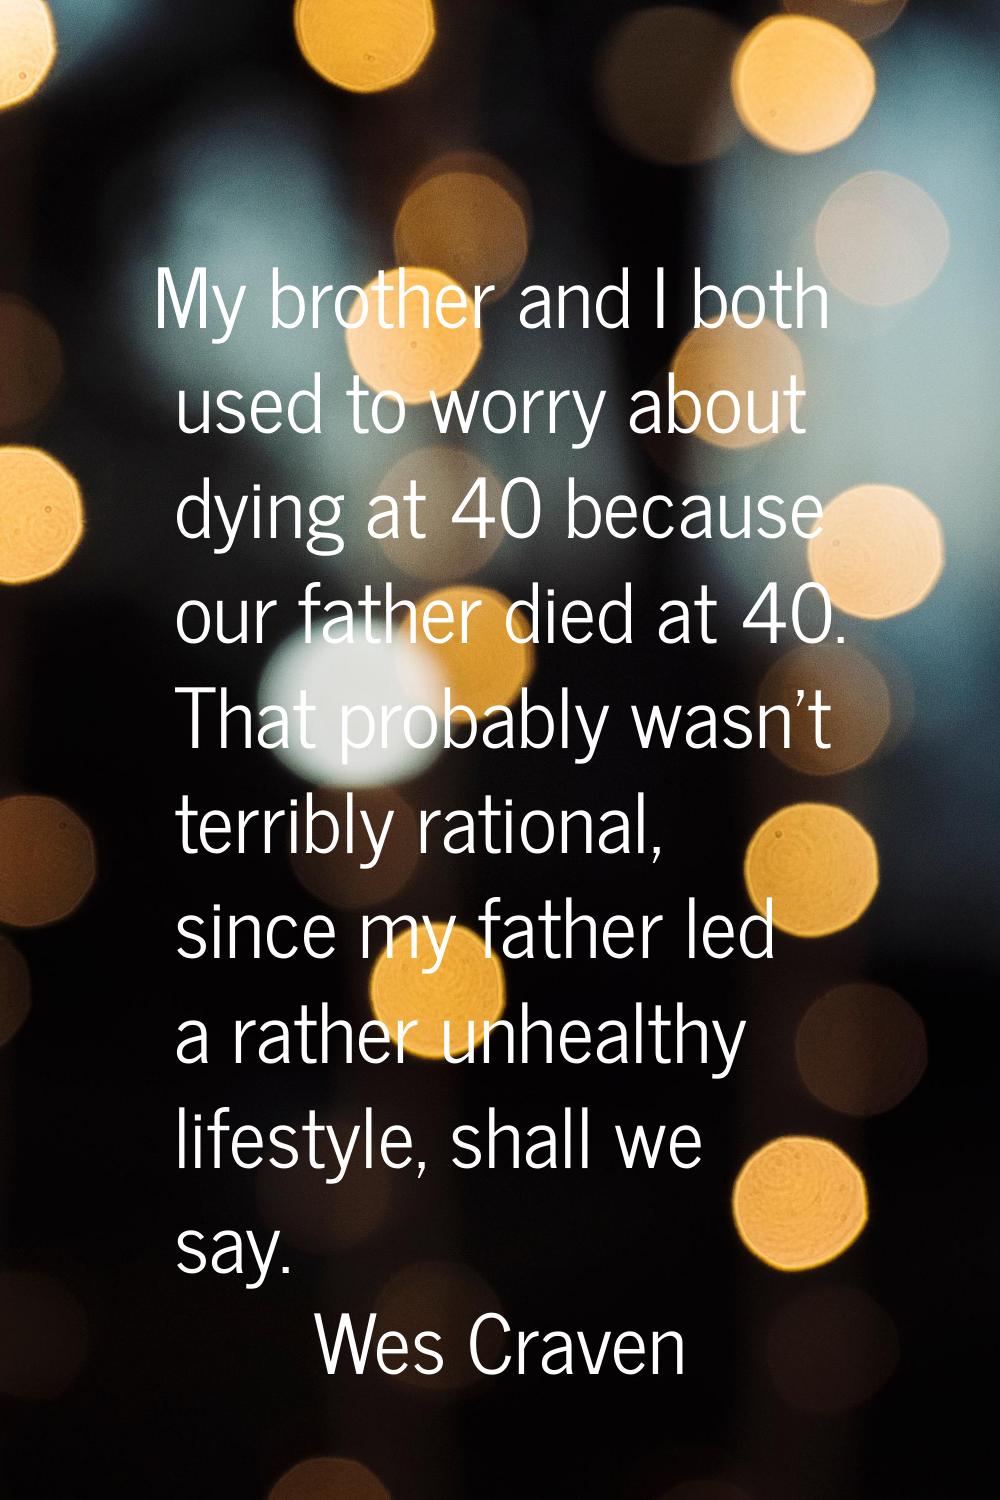 My brother and I both used to worry about dying at 40 because our father died at 40. That probably 